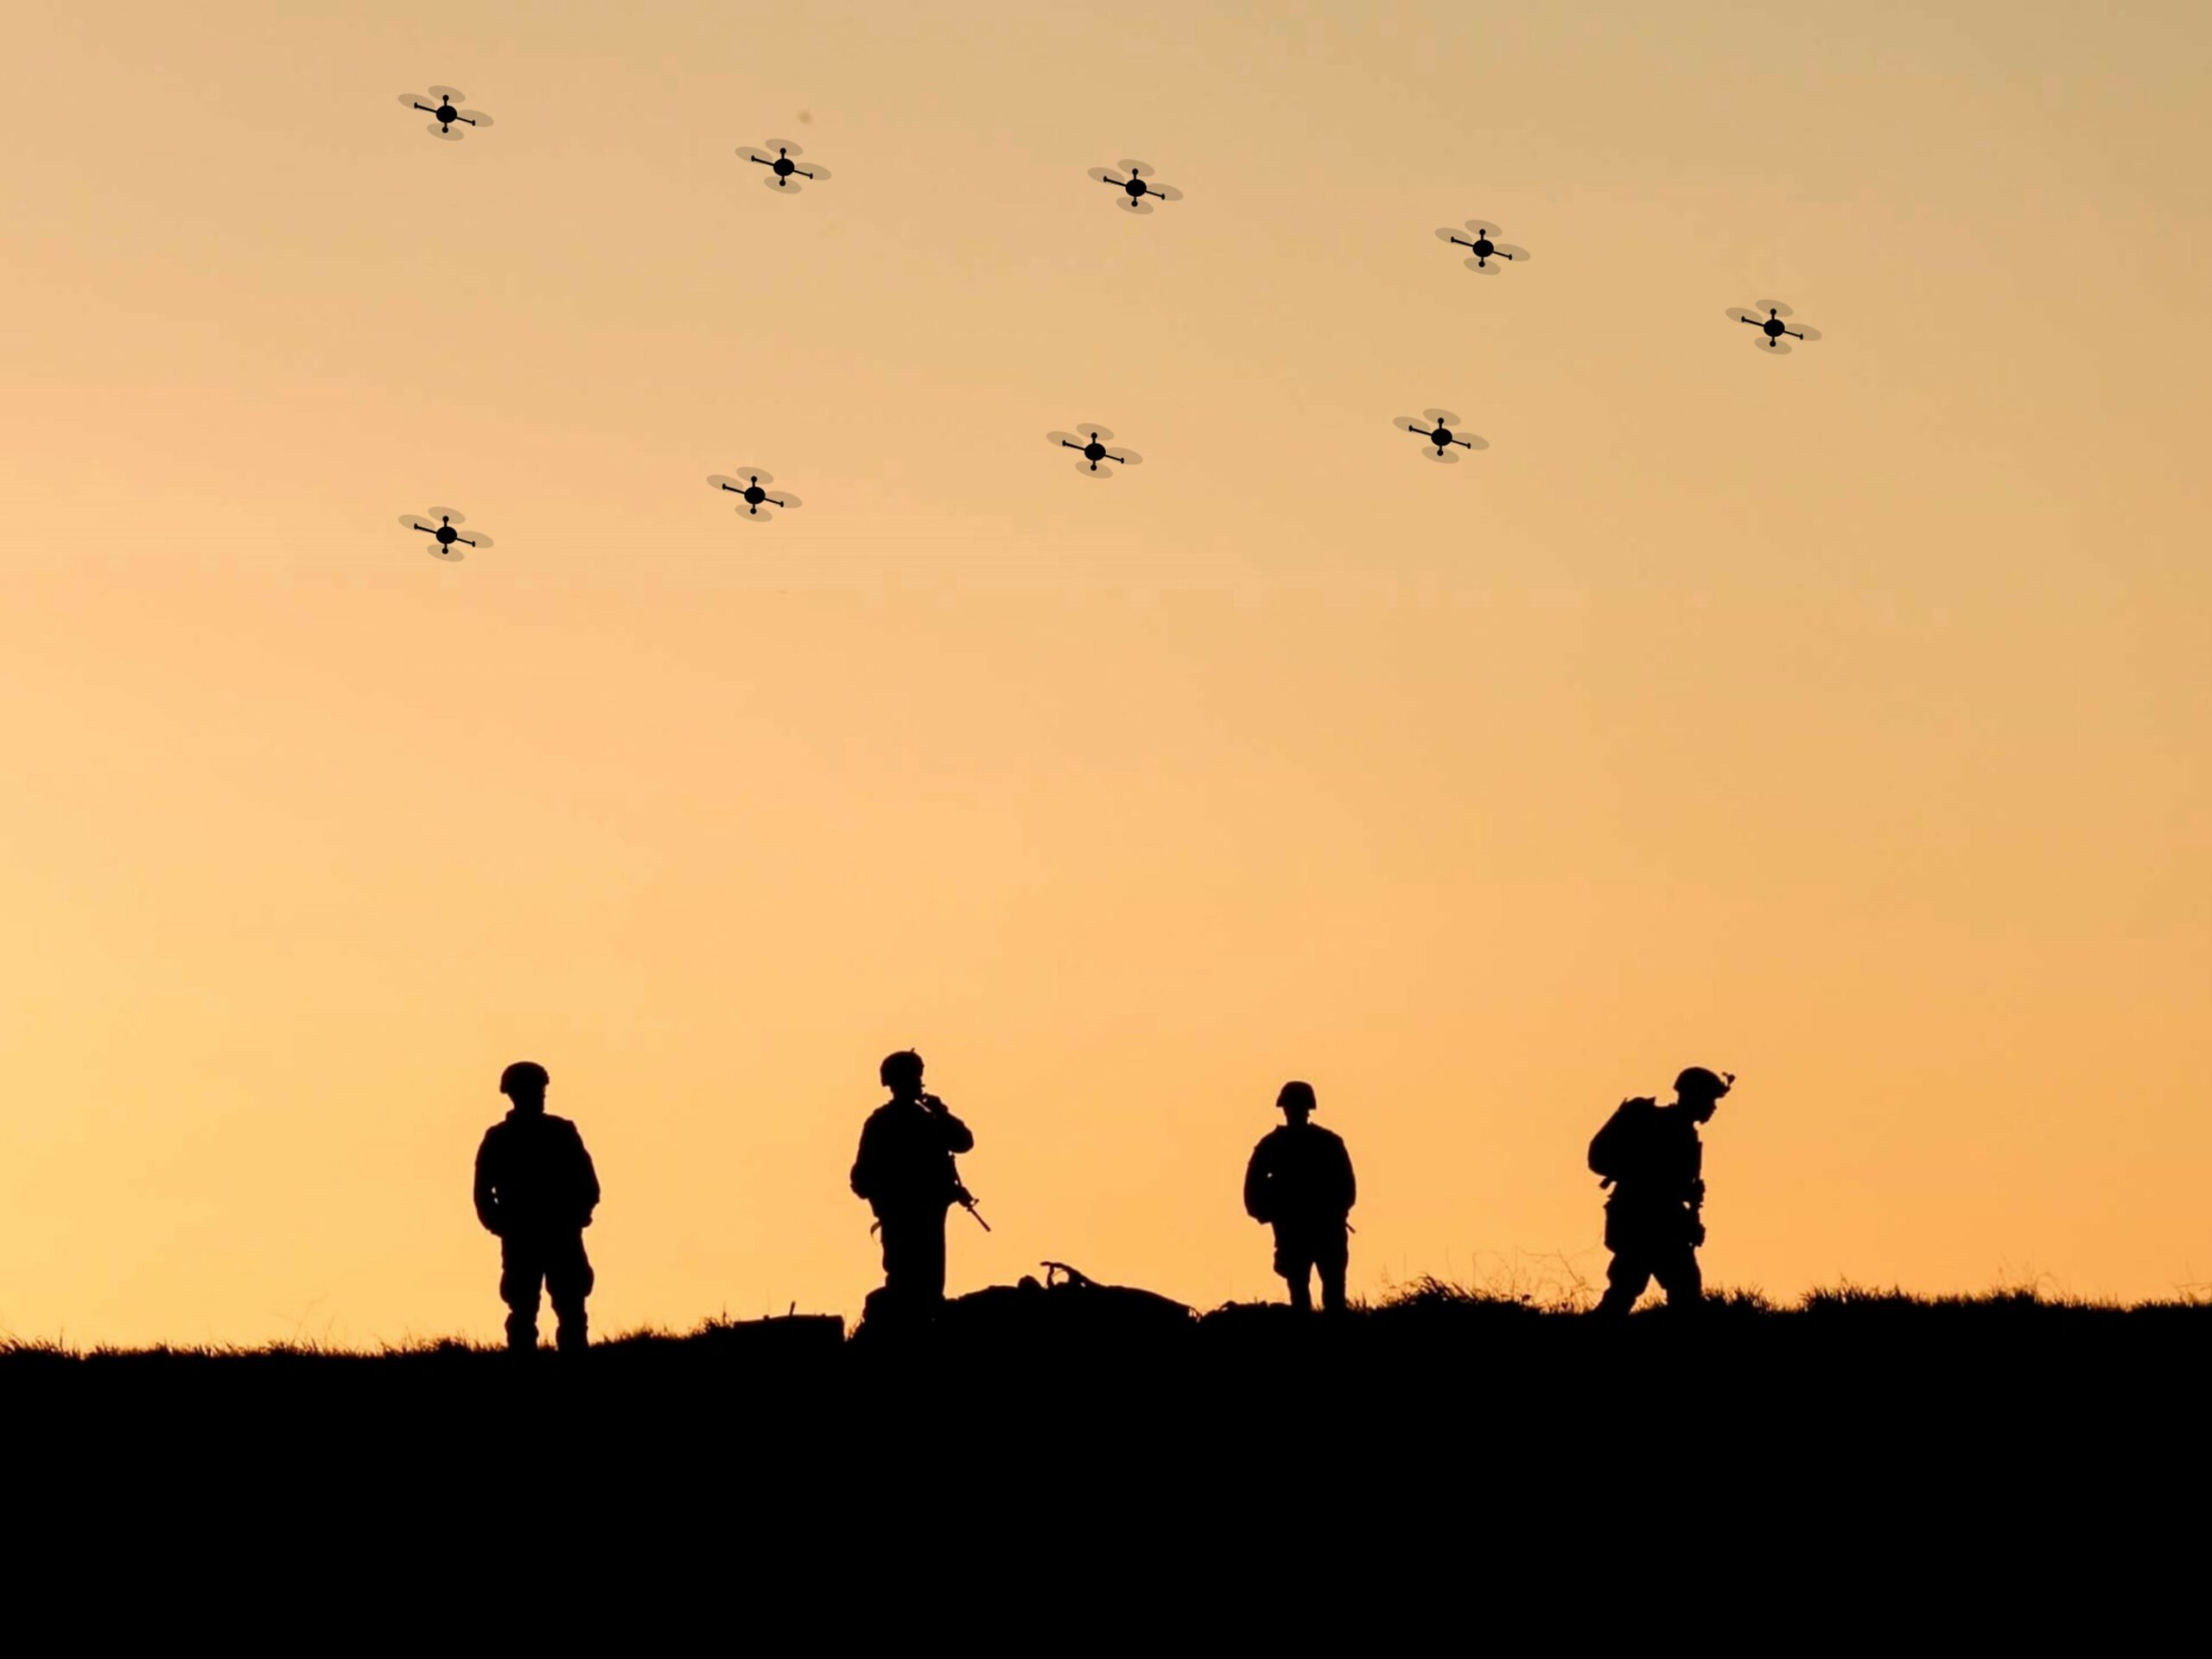 U.S. Army To Test Networked Drone Swarms